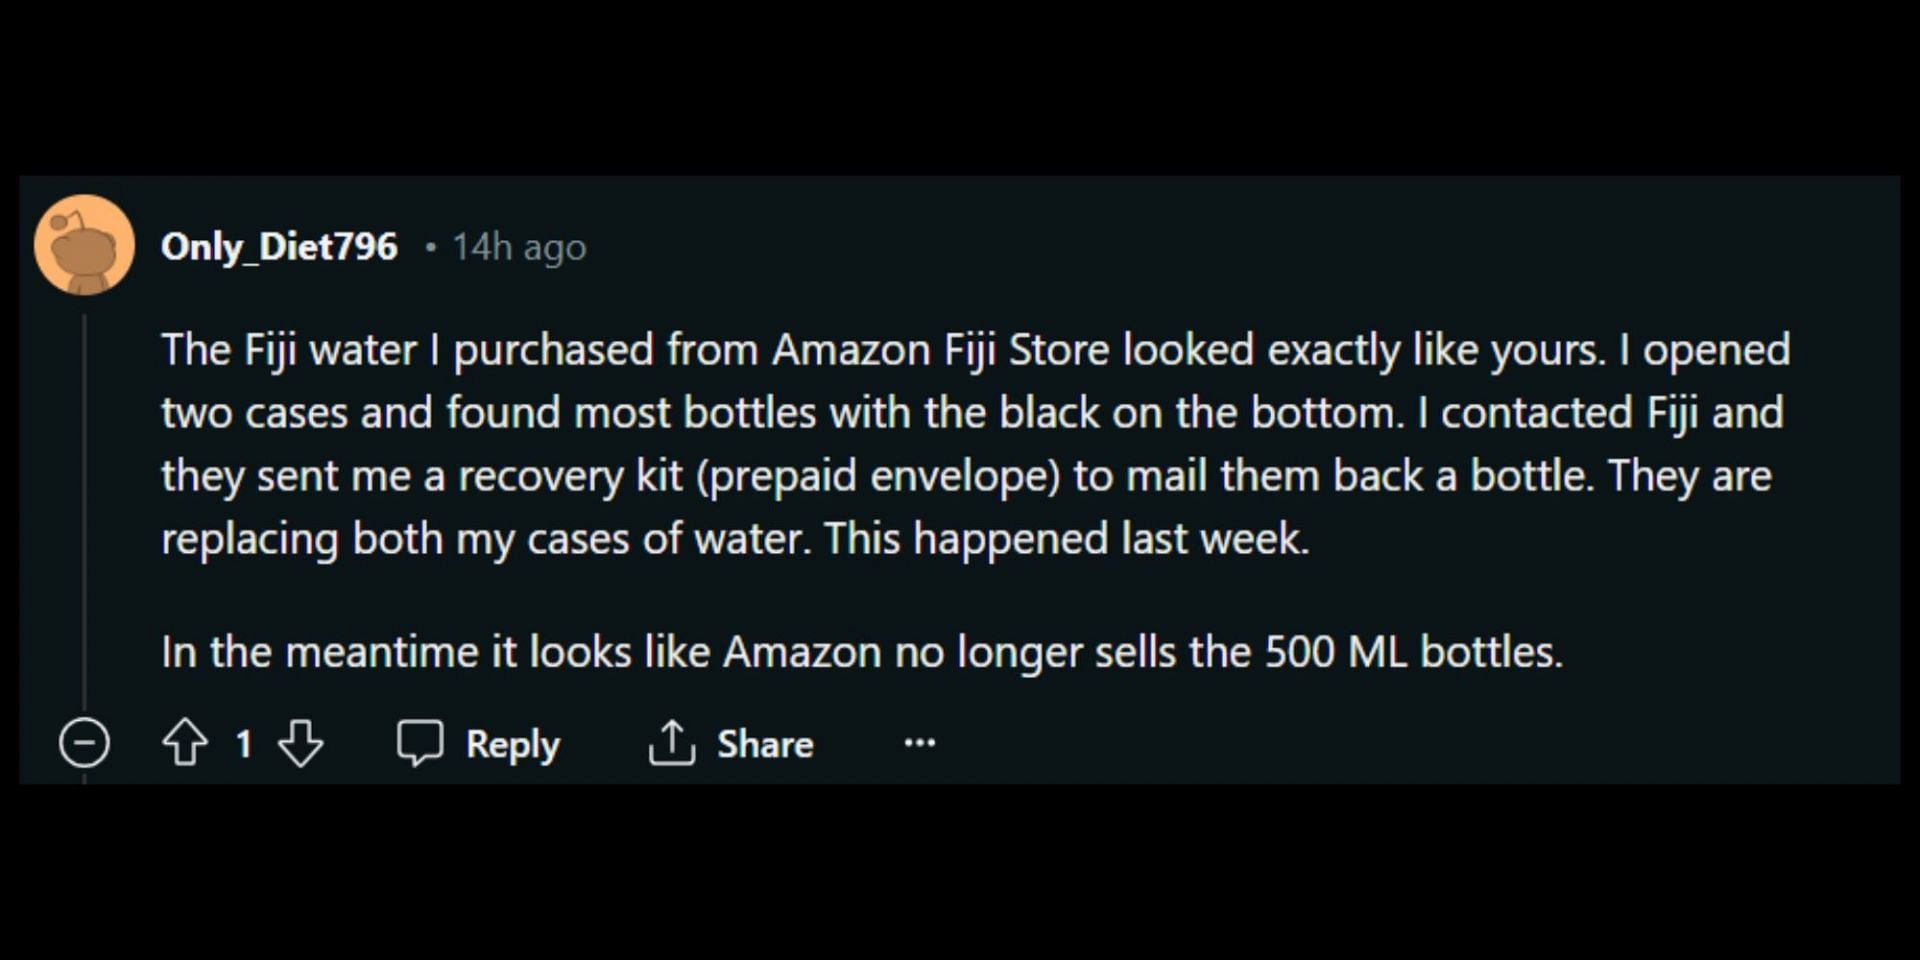 Fiji products spark recall concern amid Amazon safety notice sent to customers. (Image via Reddit/@Teds_Frozen_Head)